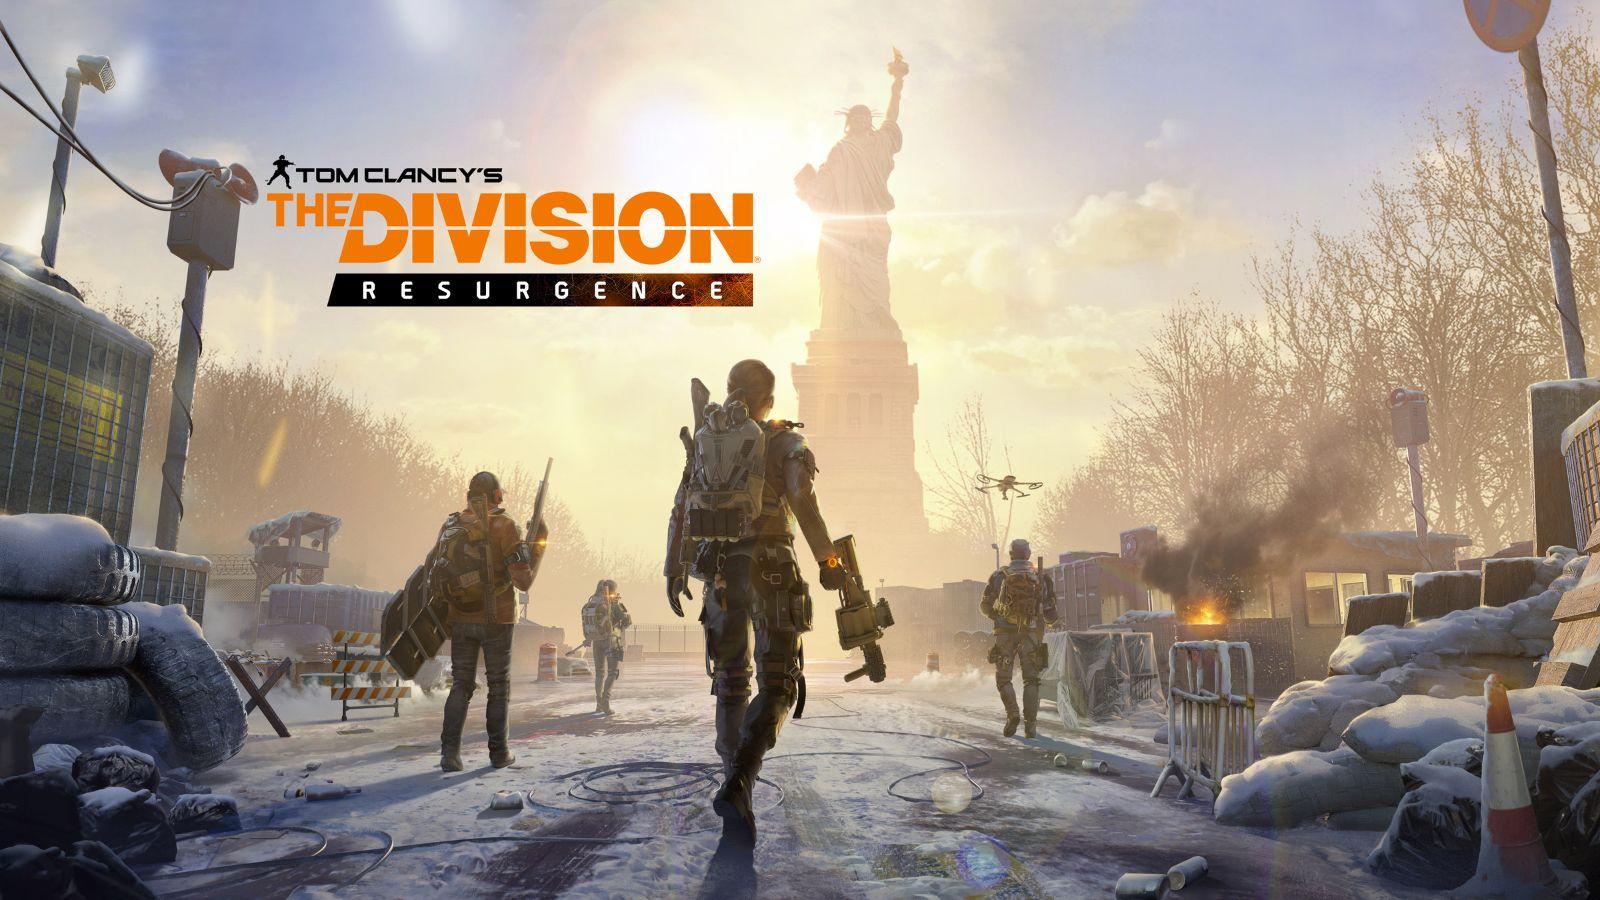 The Division Resurgence Cover Art